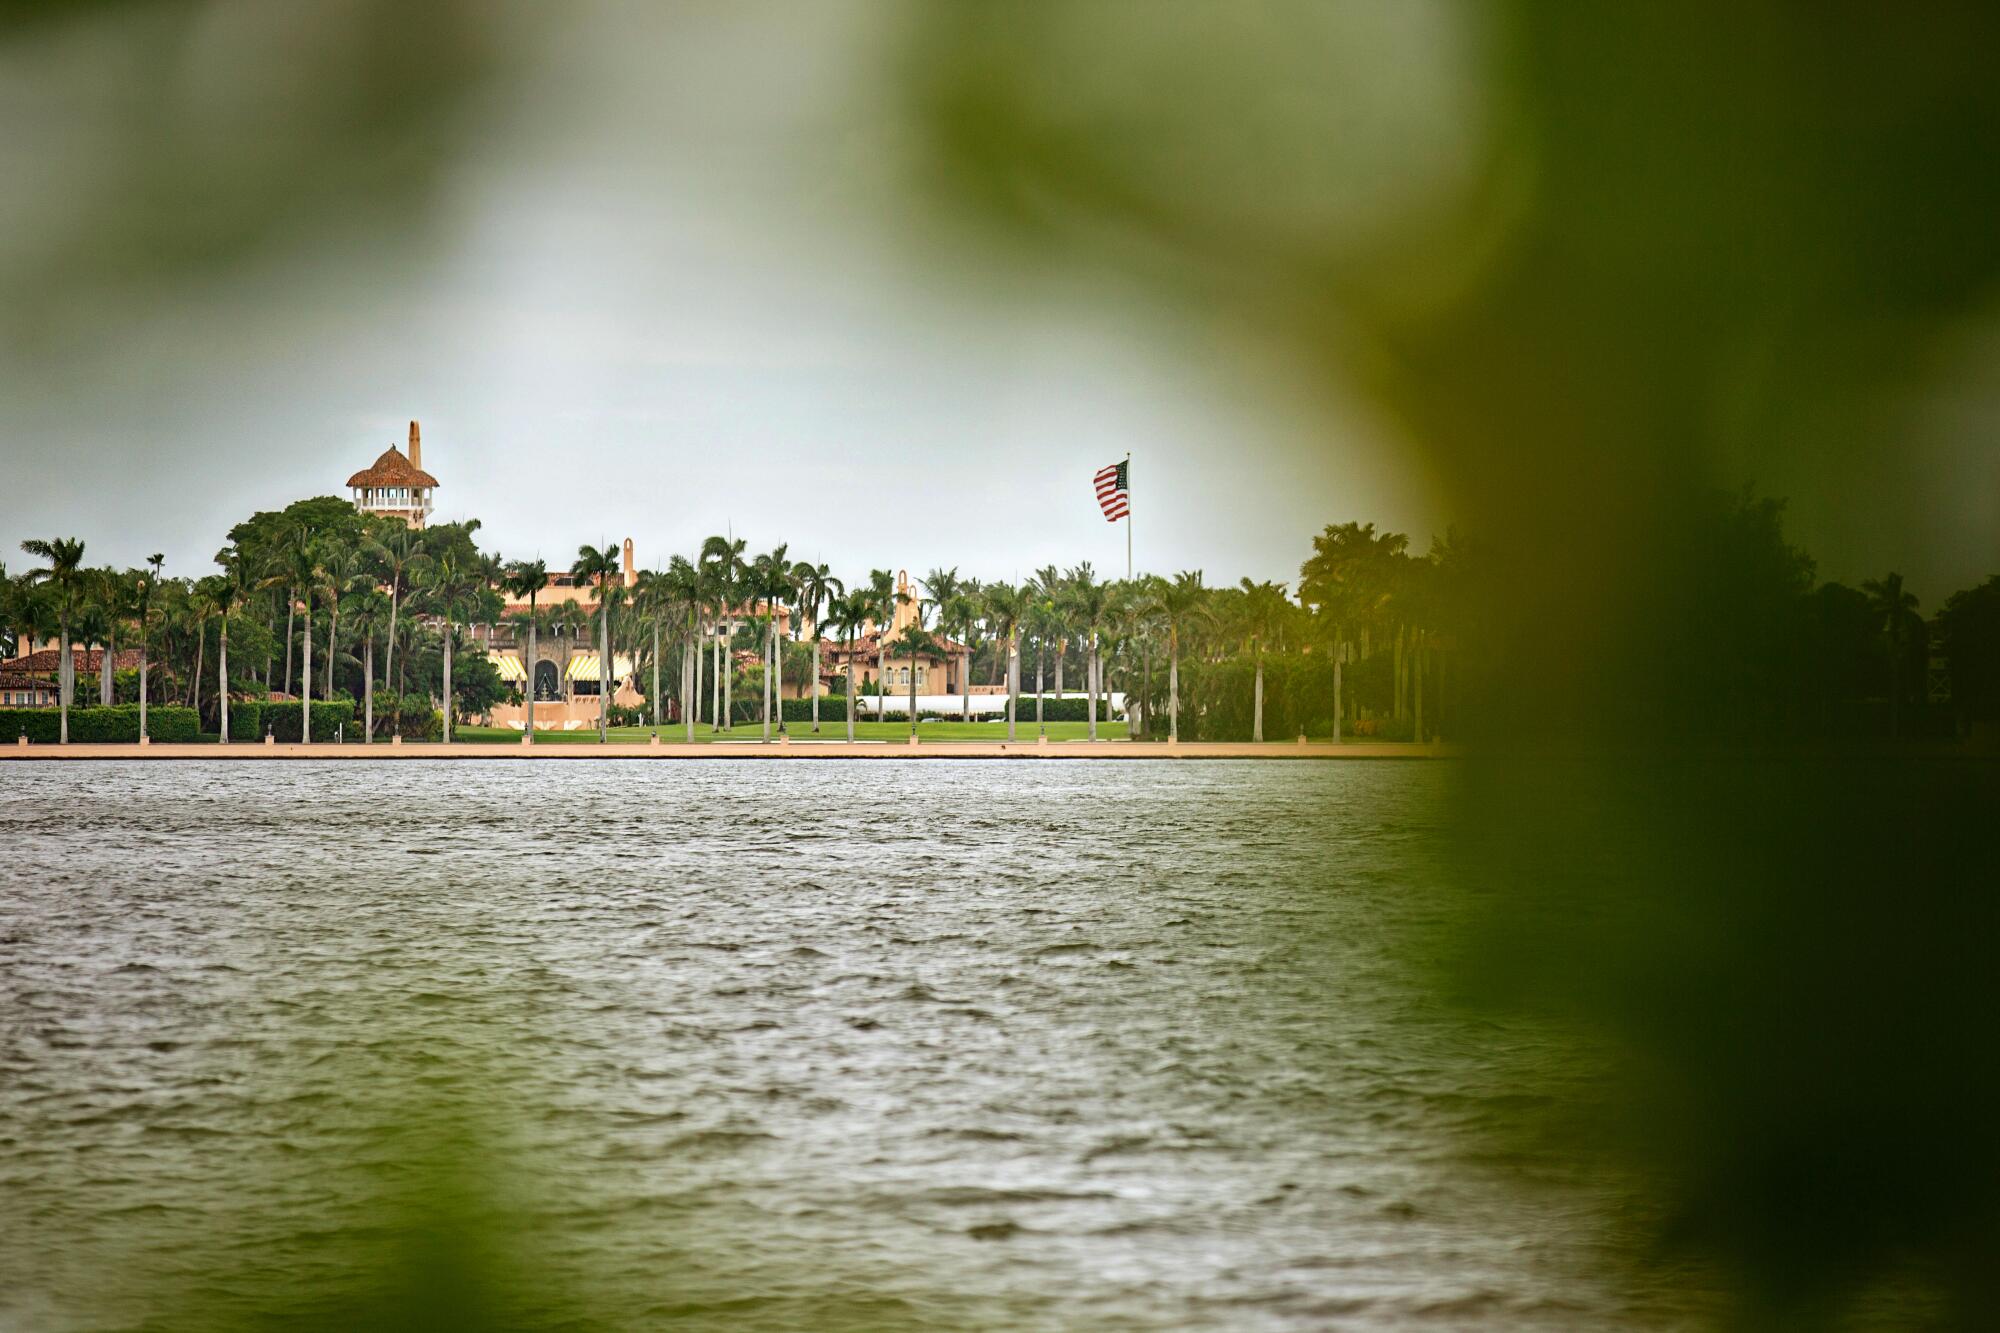 A view of Mar-a-Lago and the Intracoastal Waterway from the West Palm Beach side.